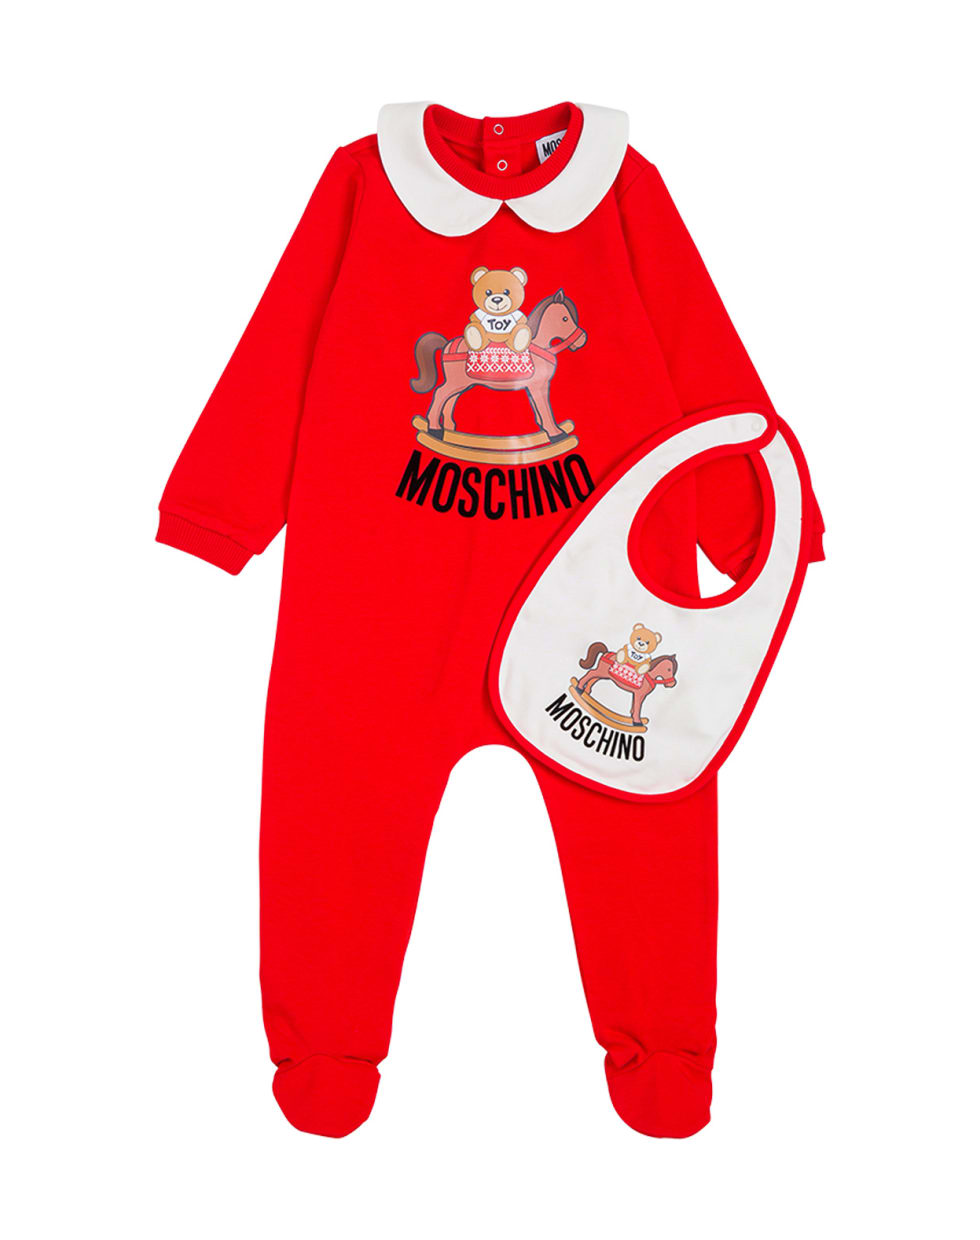 Moschino Red Cotton Romper And Bib Set With Teddy Bear Print - Red